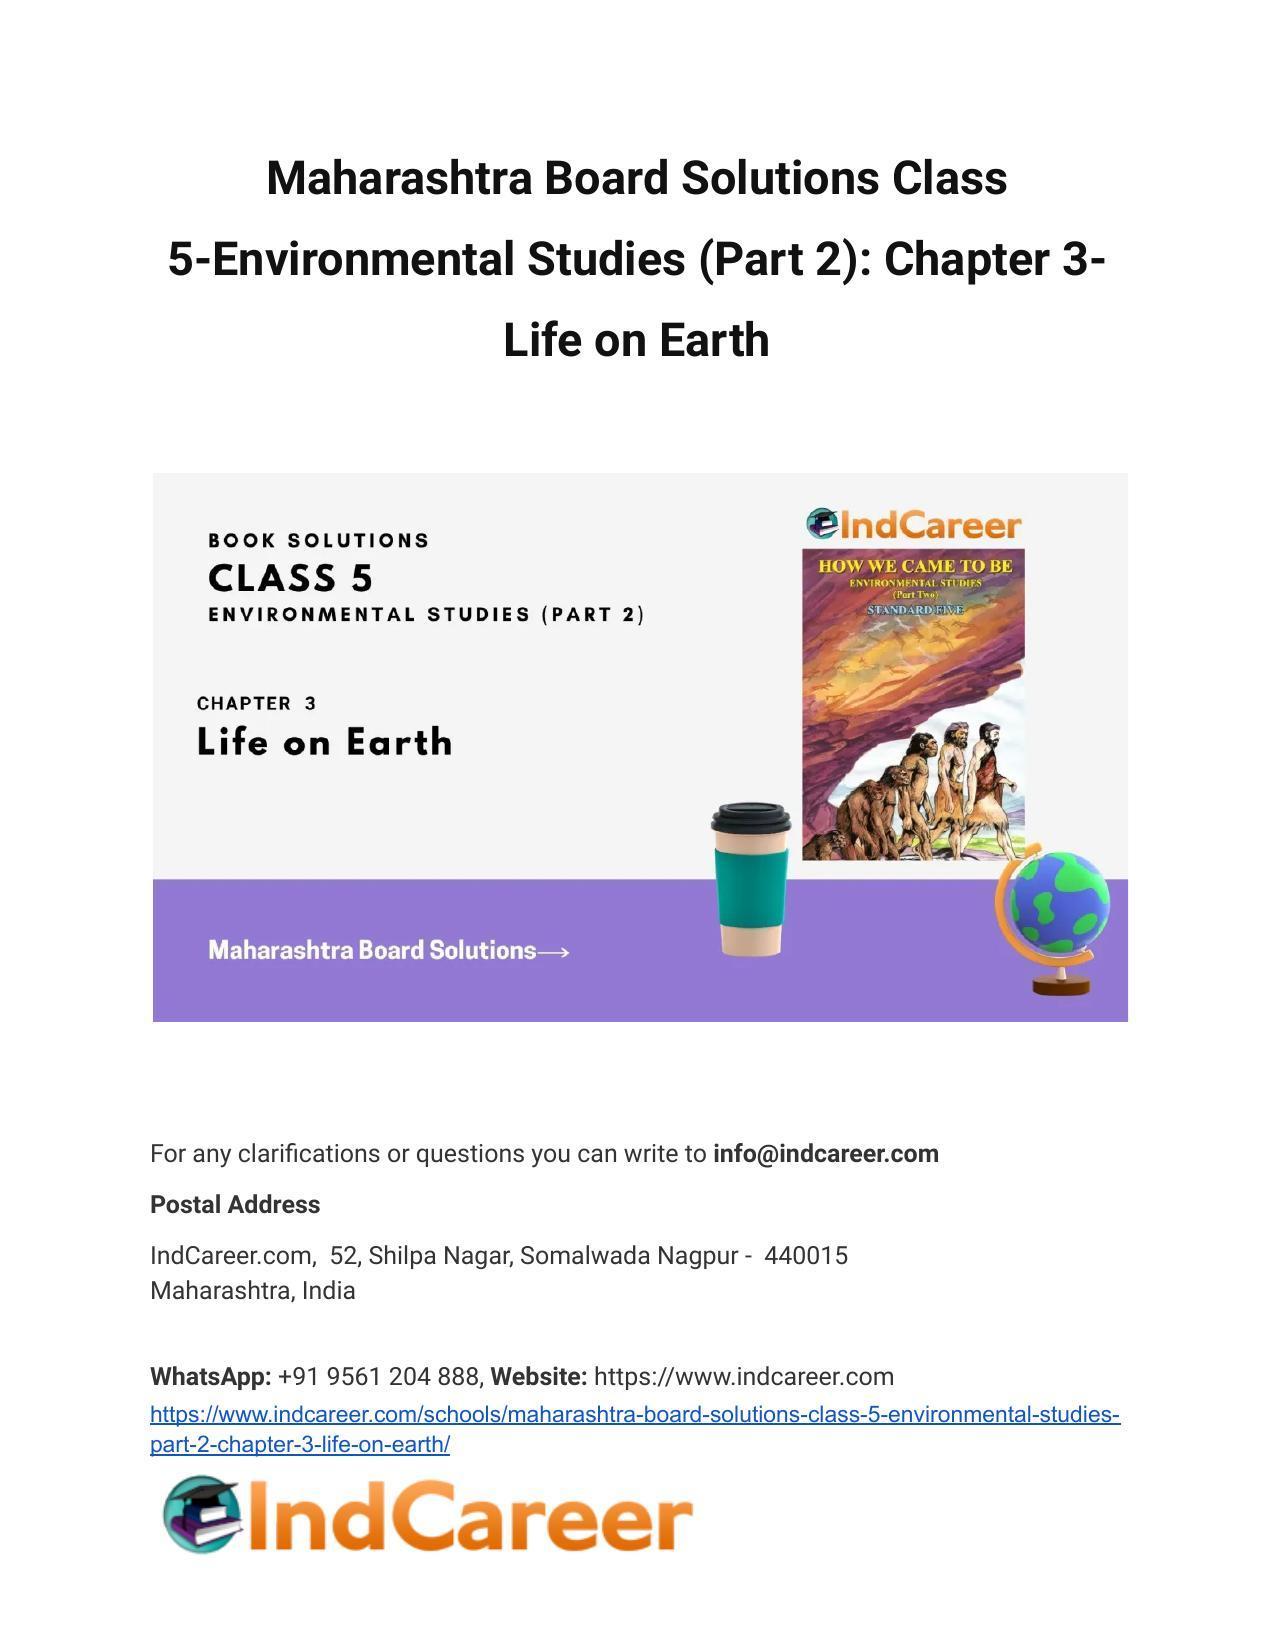 Maharashtra Board Solutions Class 5-Environmental Studies (Part 2): Chapter 3- Life on Earth - Page 1